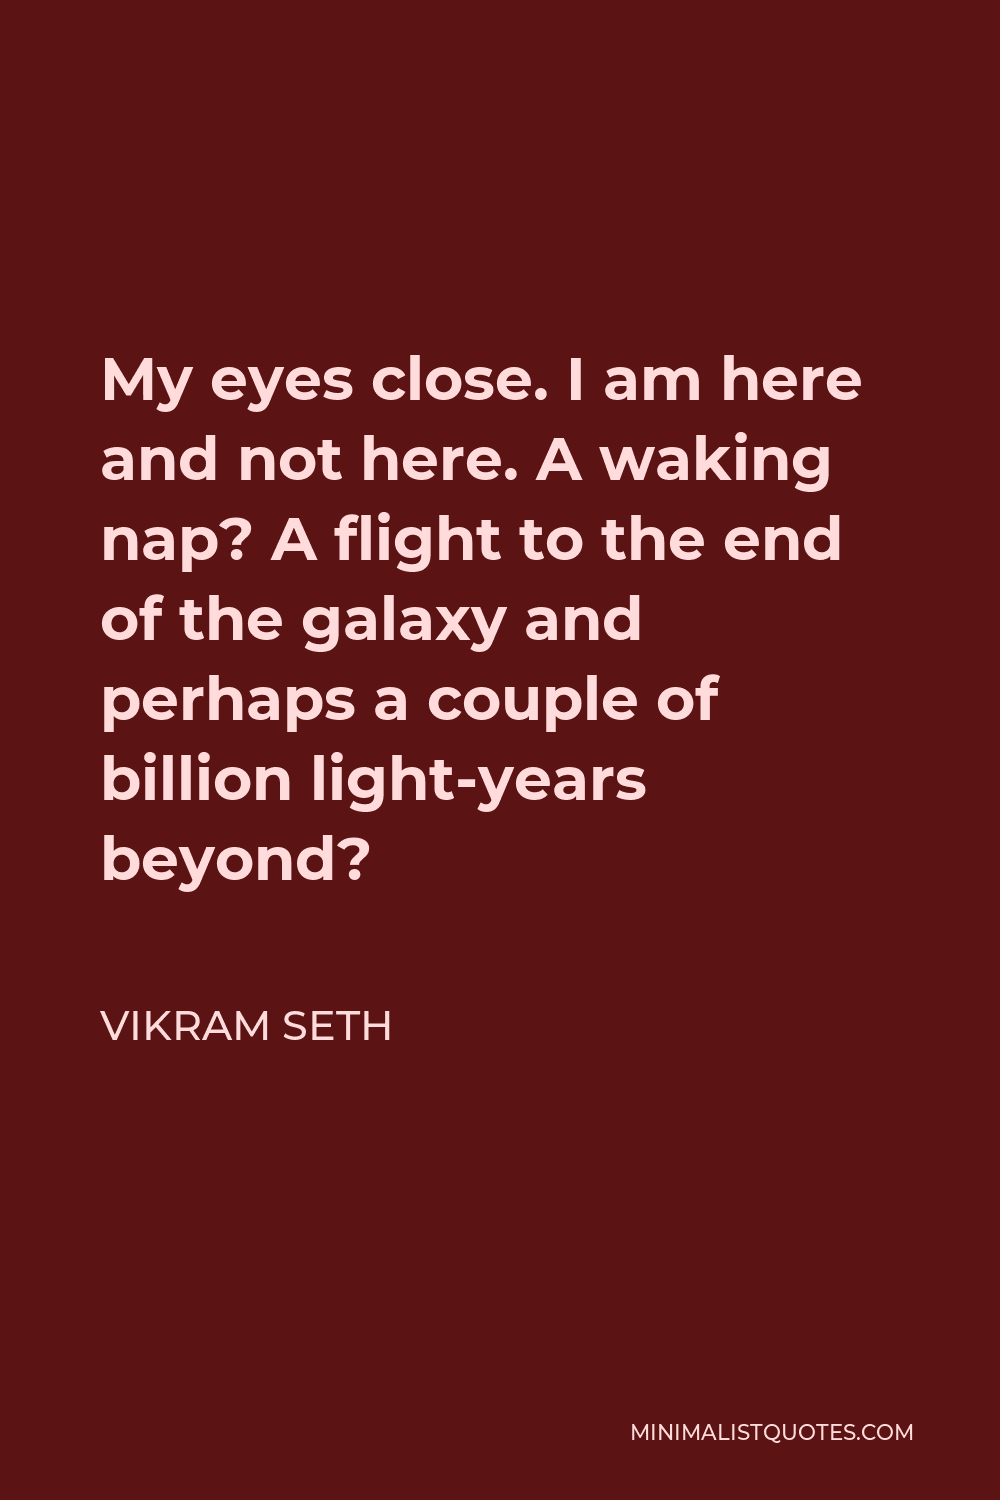 Vikram Seth Quote - My eyes close. I am here and not here. A waking nap? A flight to the end of the galaxy and perhaps a couple of billion light-years beyond?